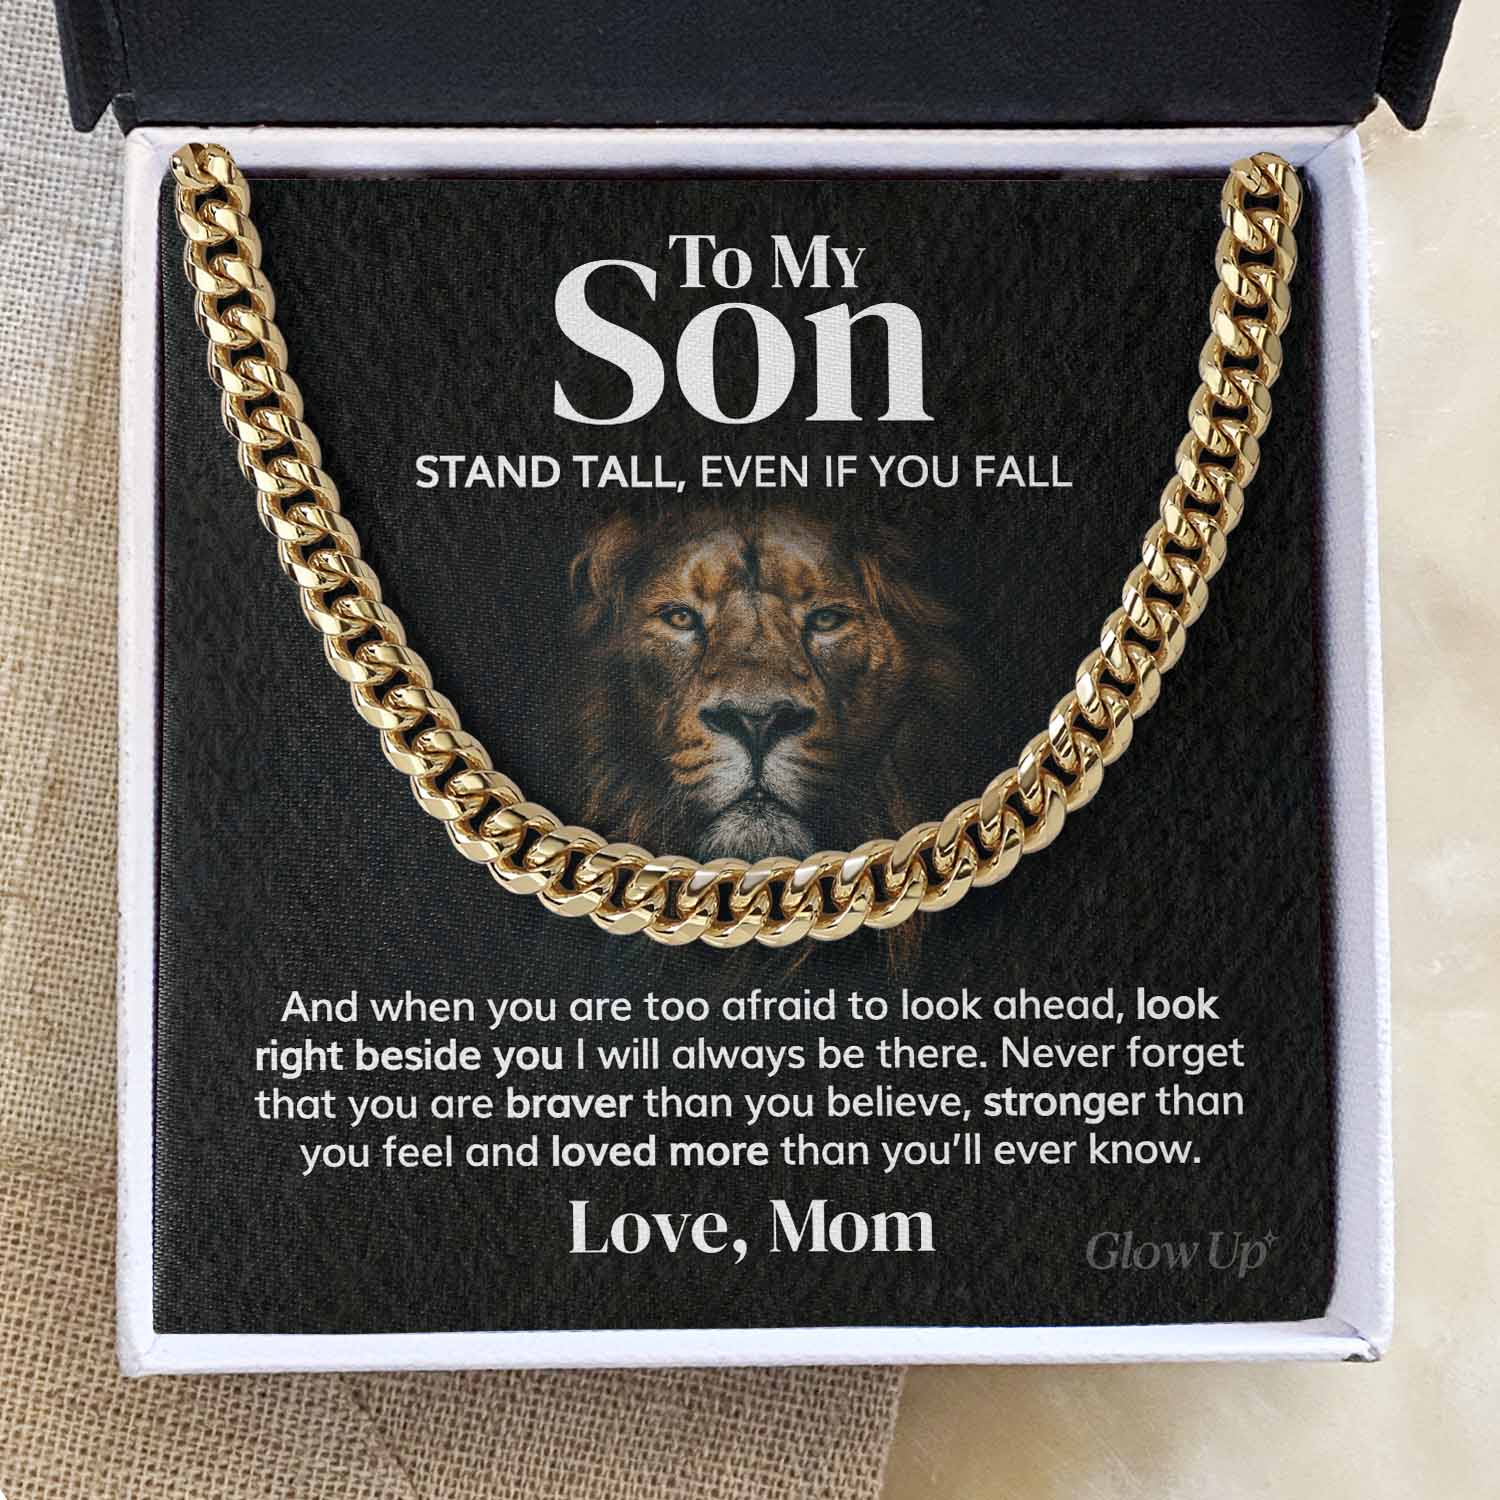 Glow Up Cuban Link Chain 18k Gold Finish / Two-Toned Box To my Son from Mom - 5mm Cuban Link Chain - Stand Tall